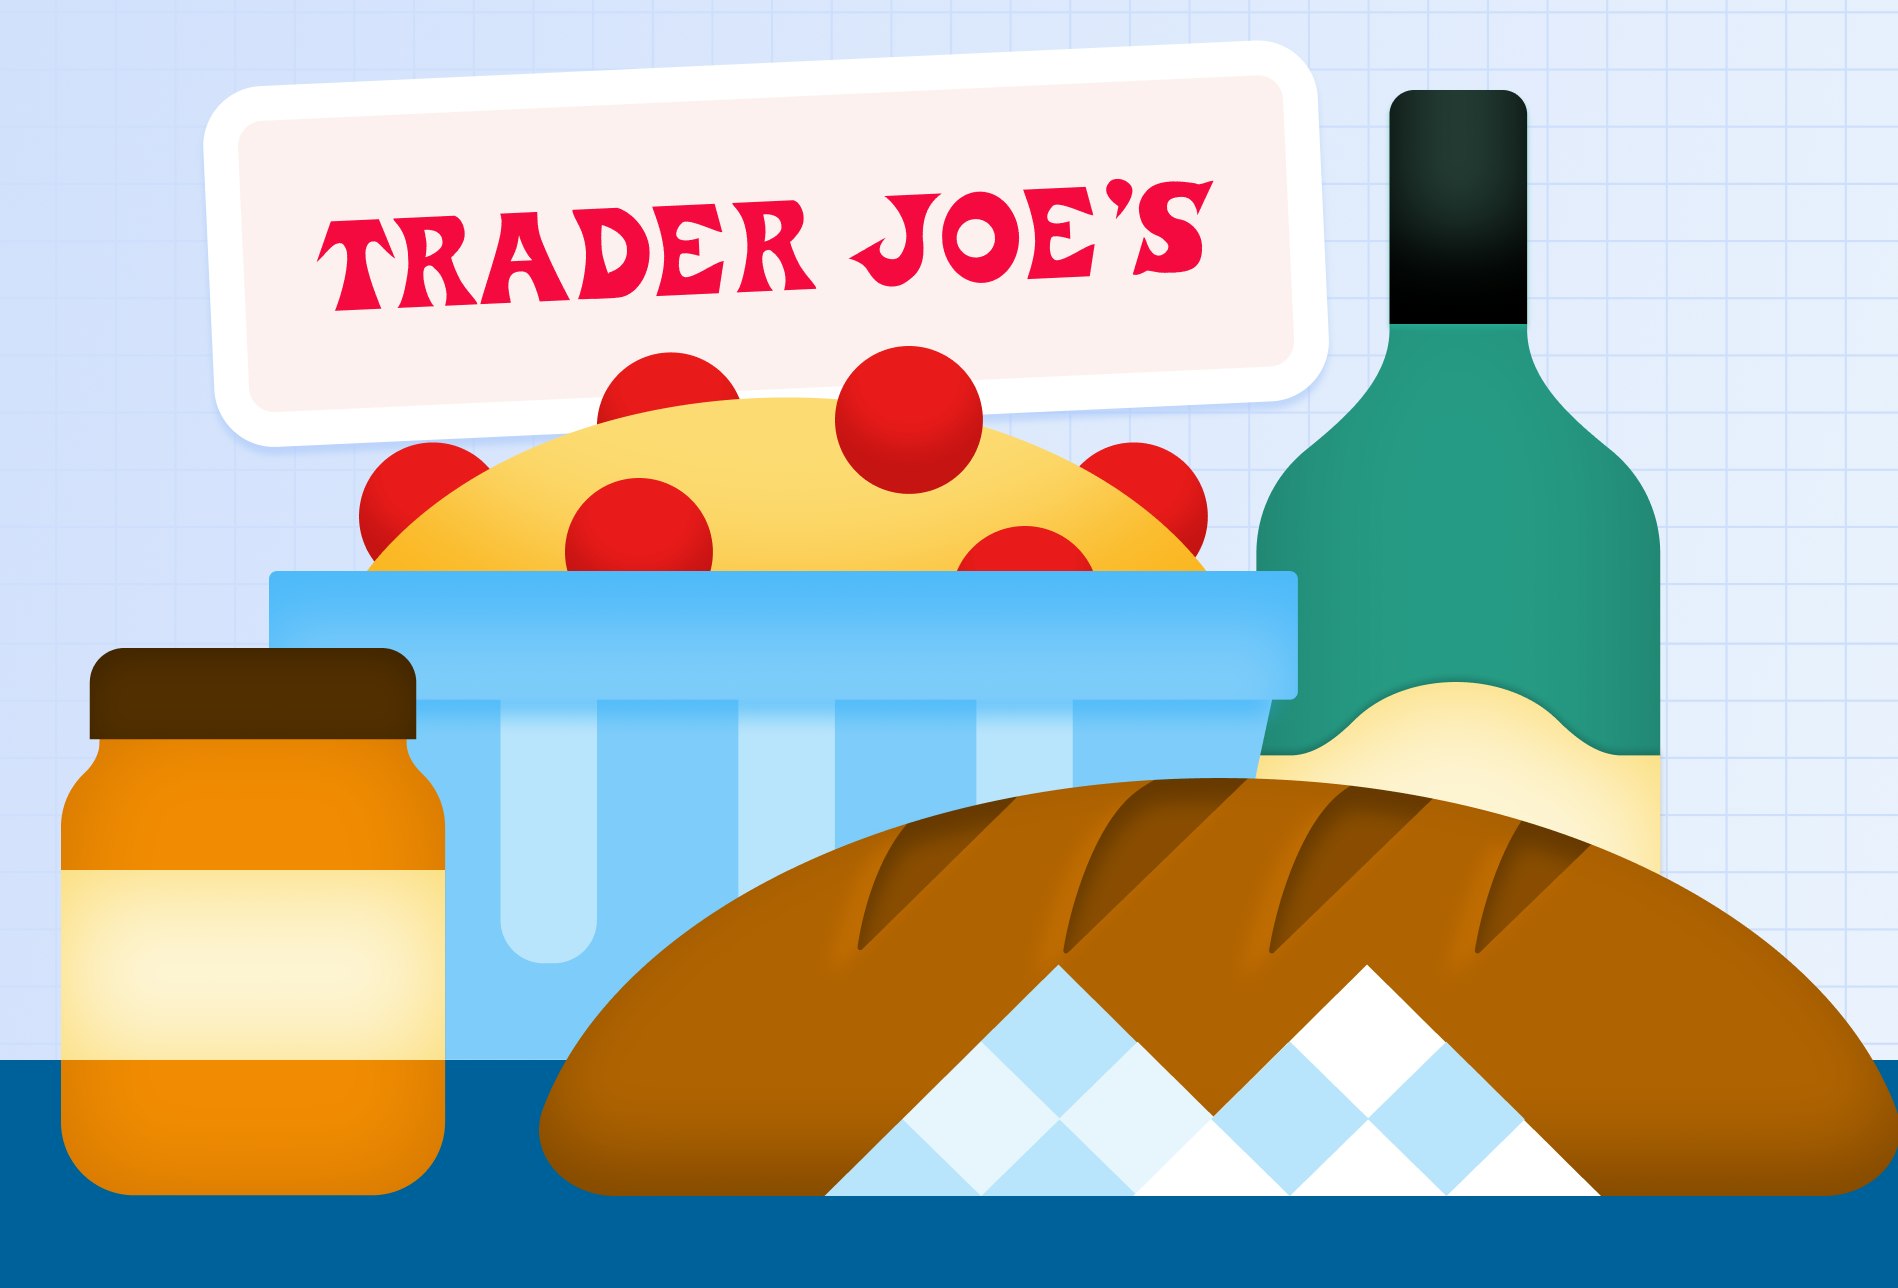 Can You Get Trader Joe's Delivery? [n] Easy Ways That Work